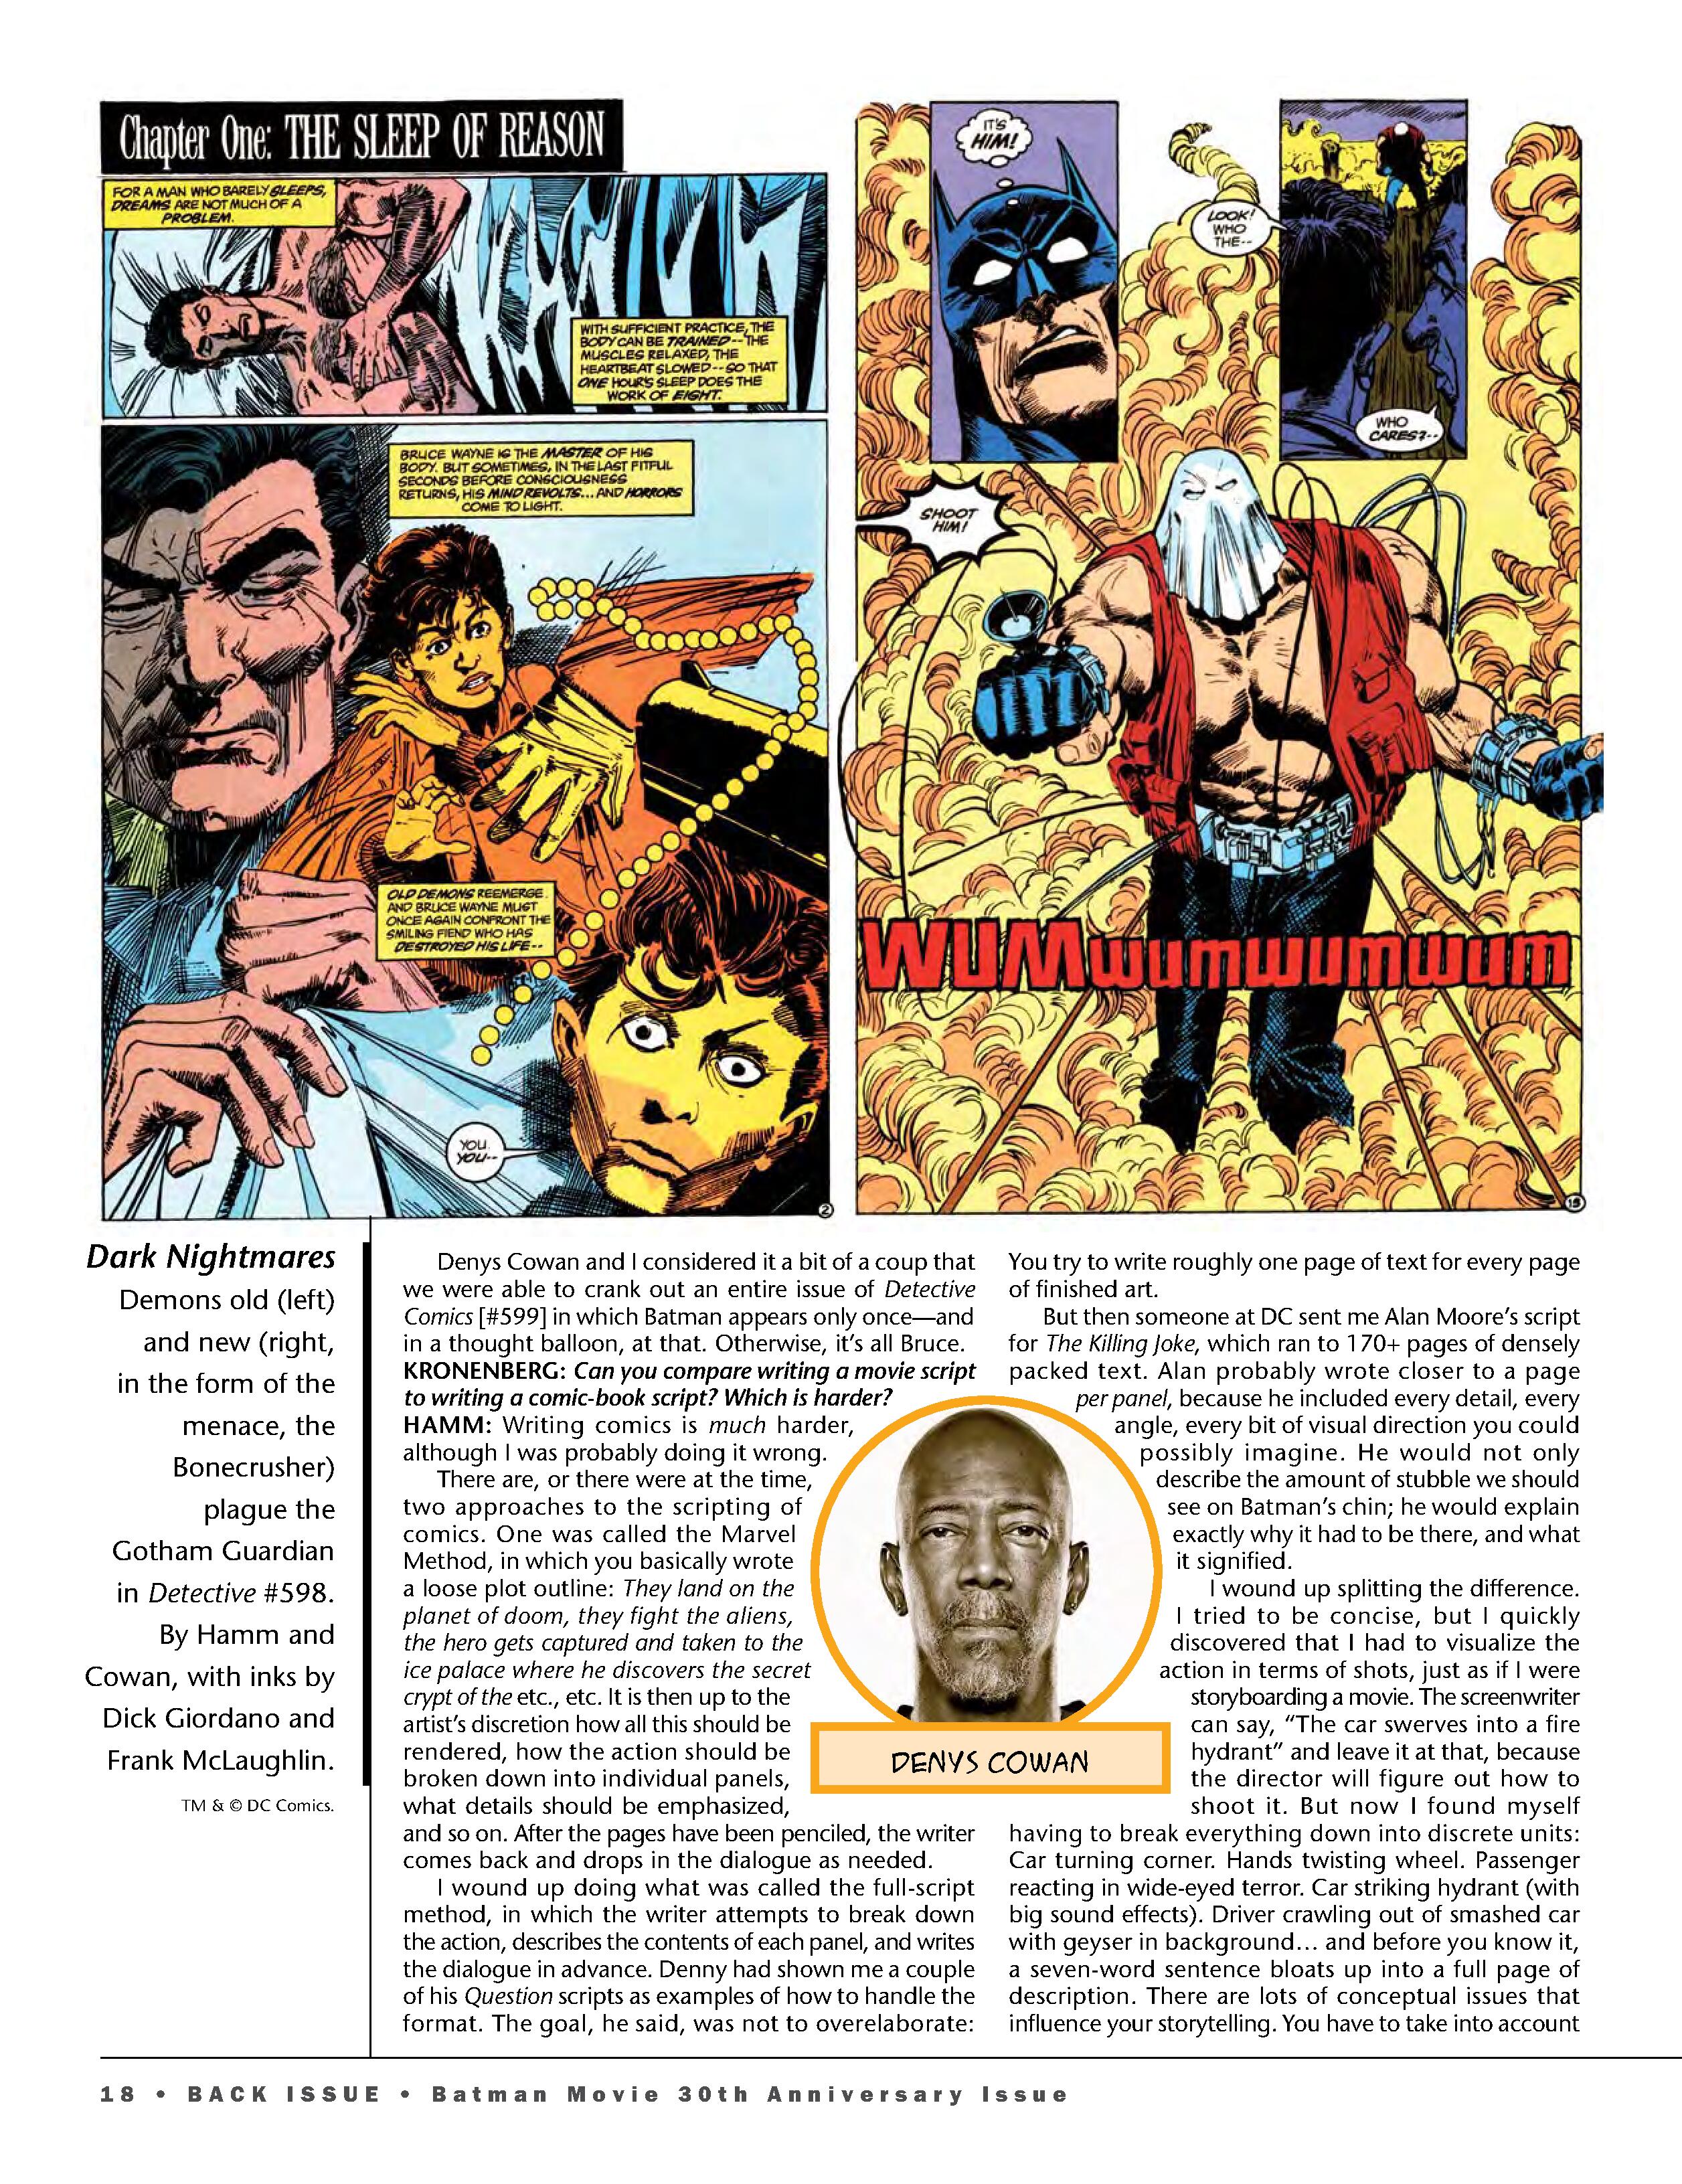 Read online Back Issue comic -  Issue #113 - 20